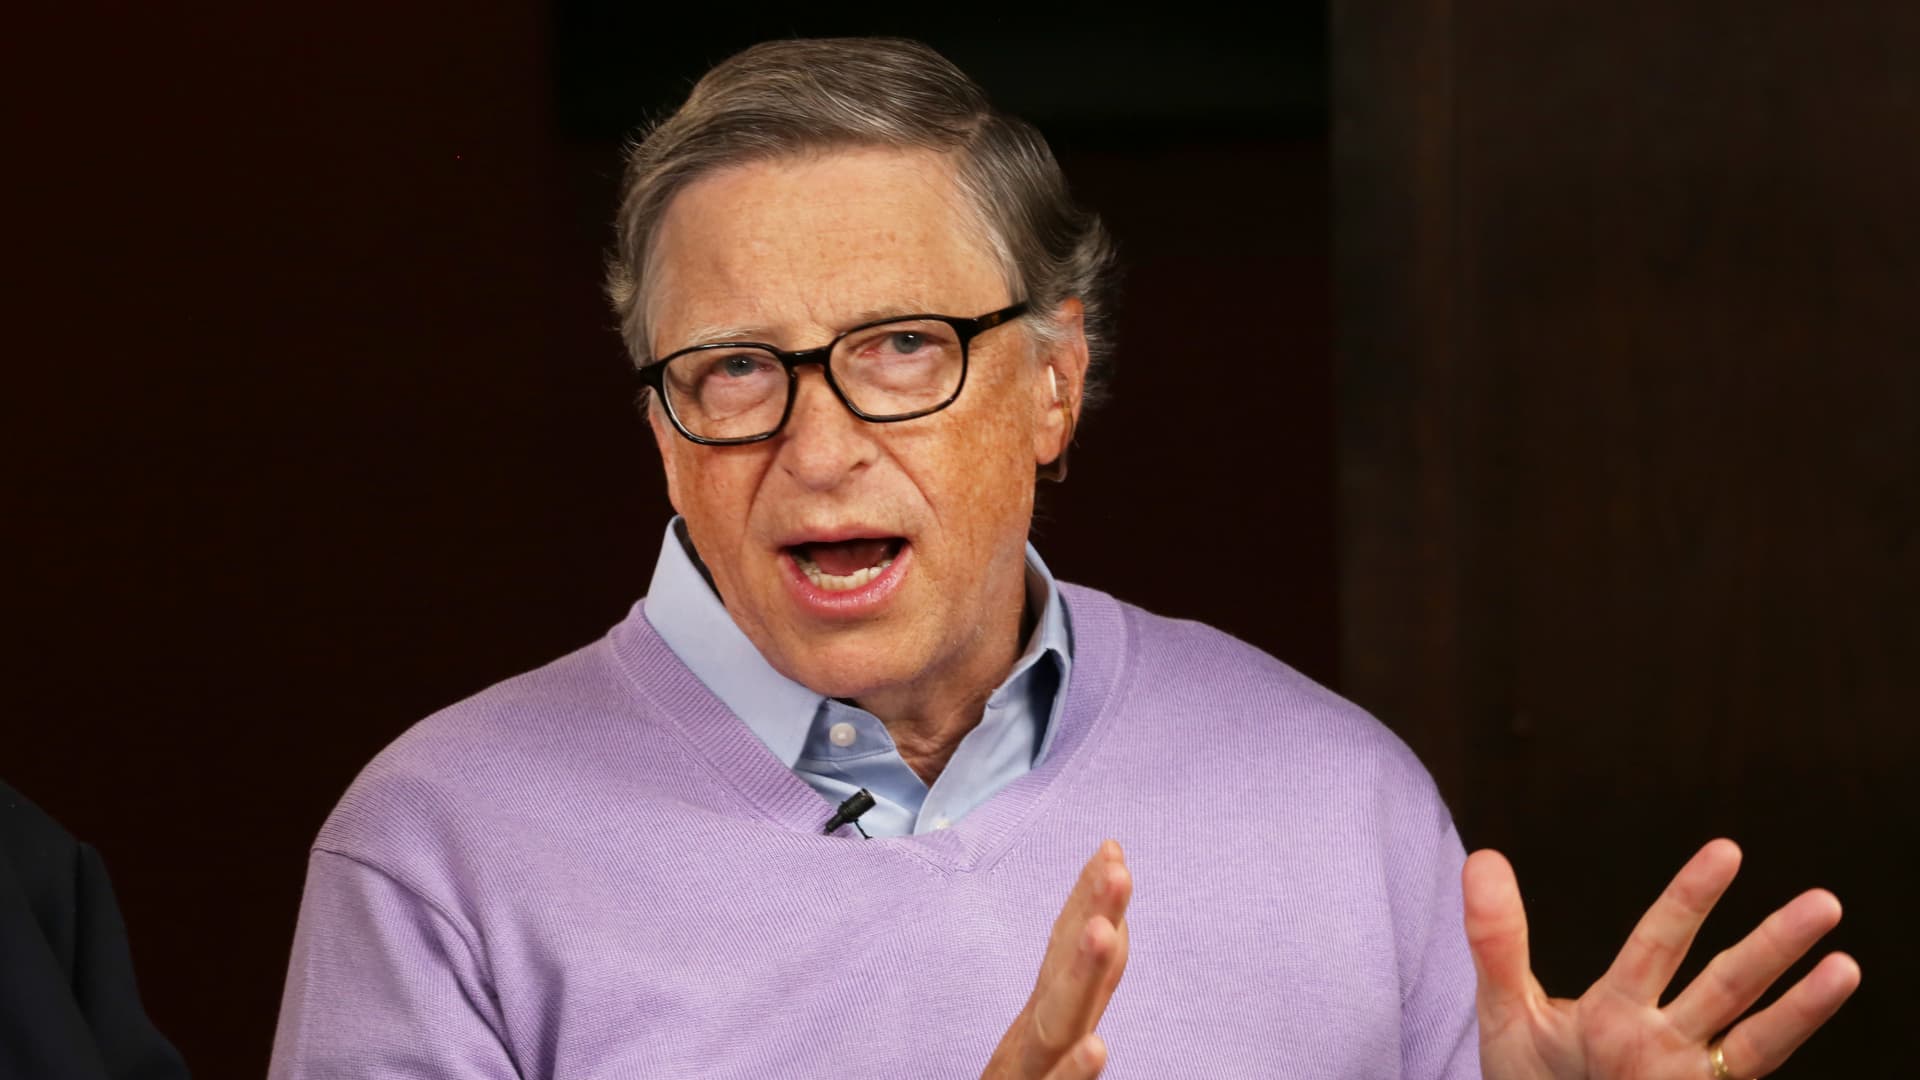 Bill Gates says crypto and NFTs are based on ‘greater fool theory’